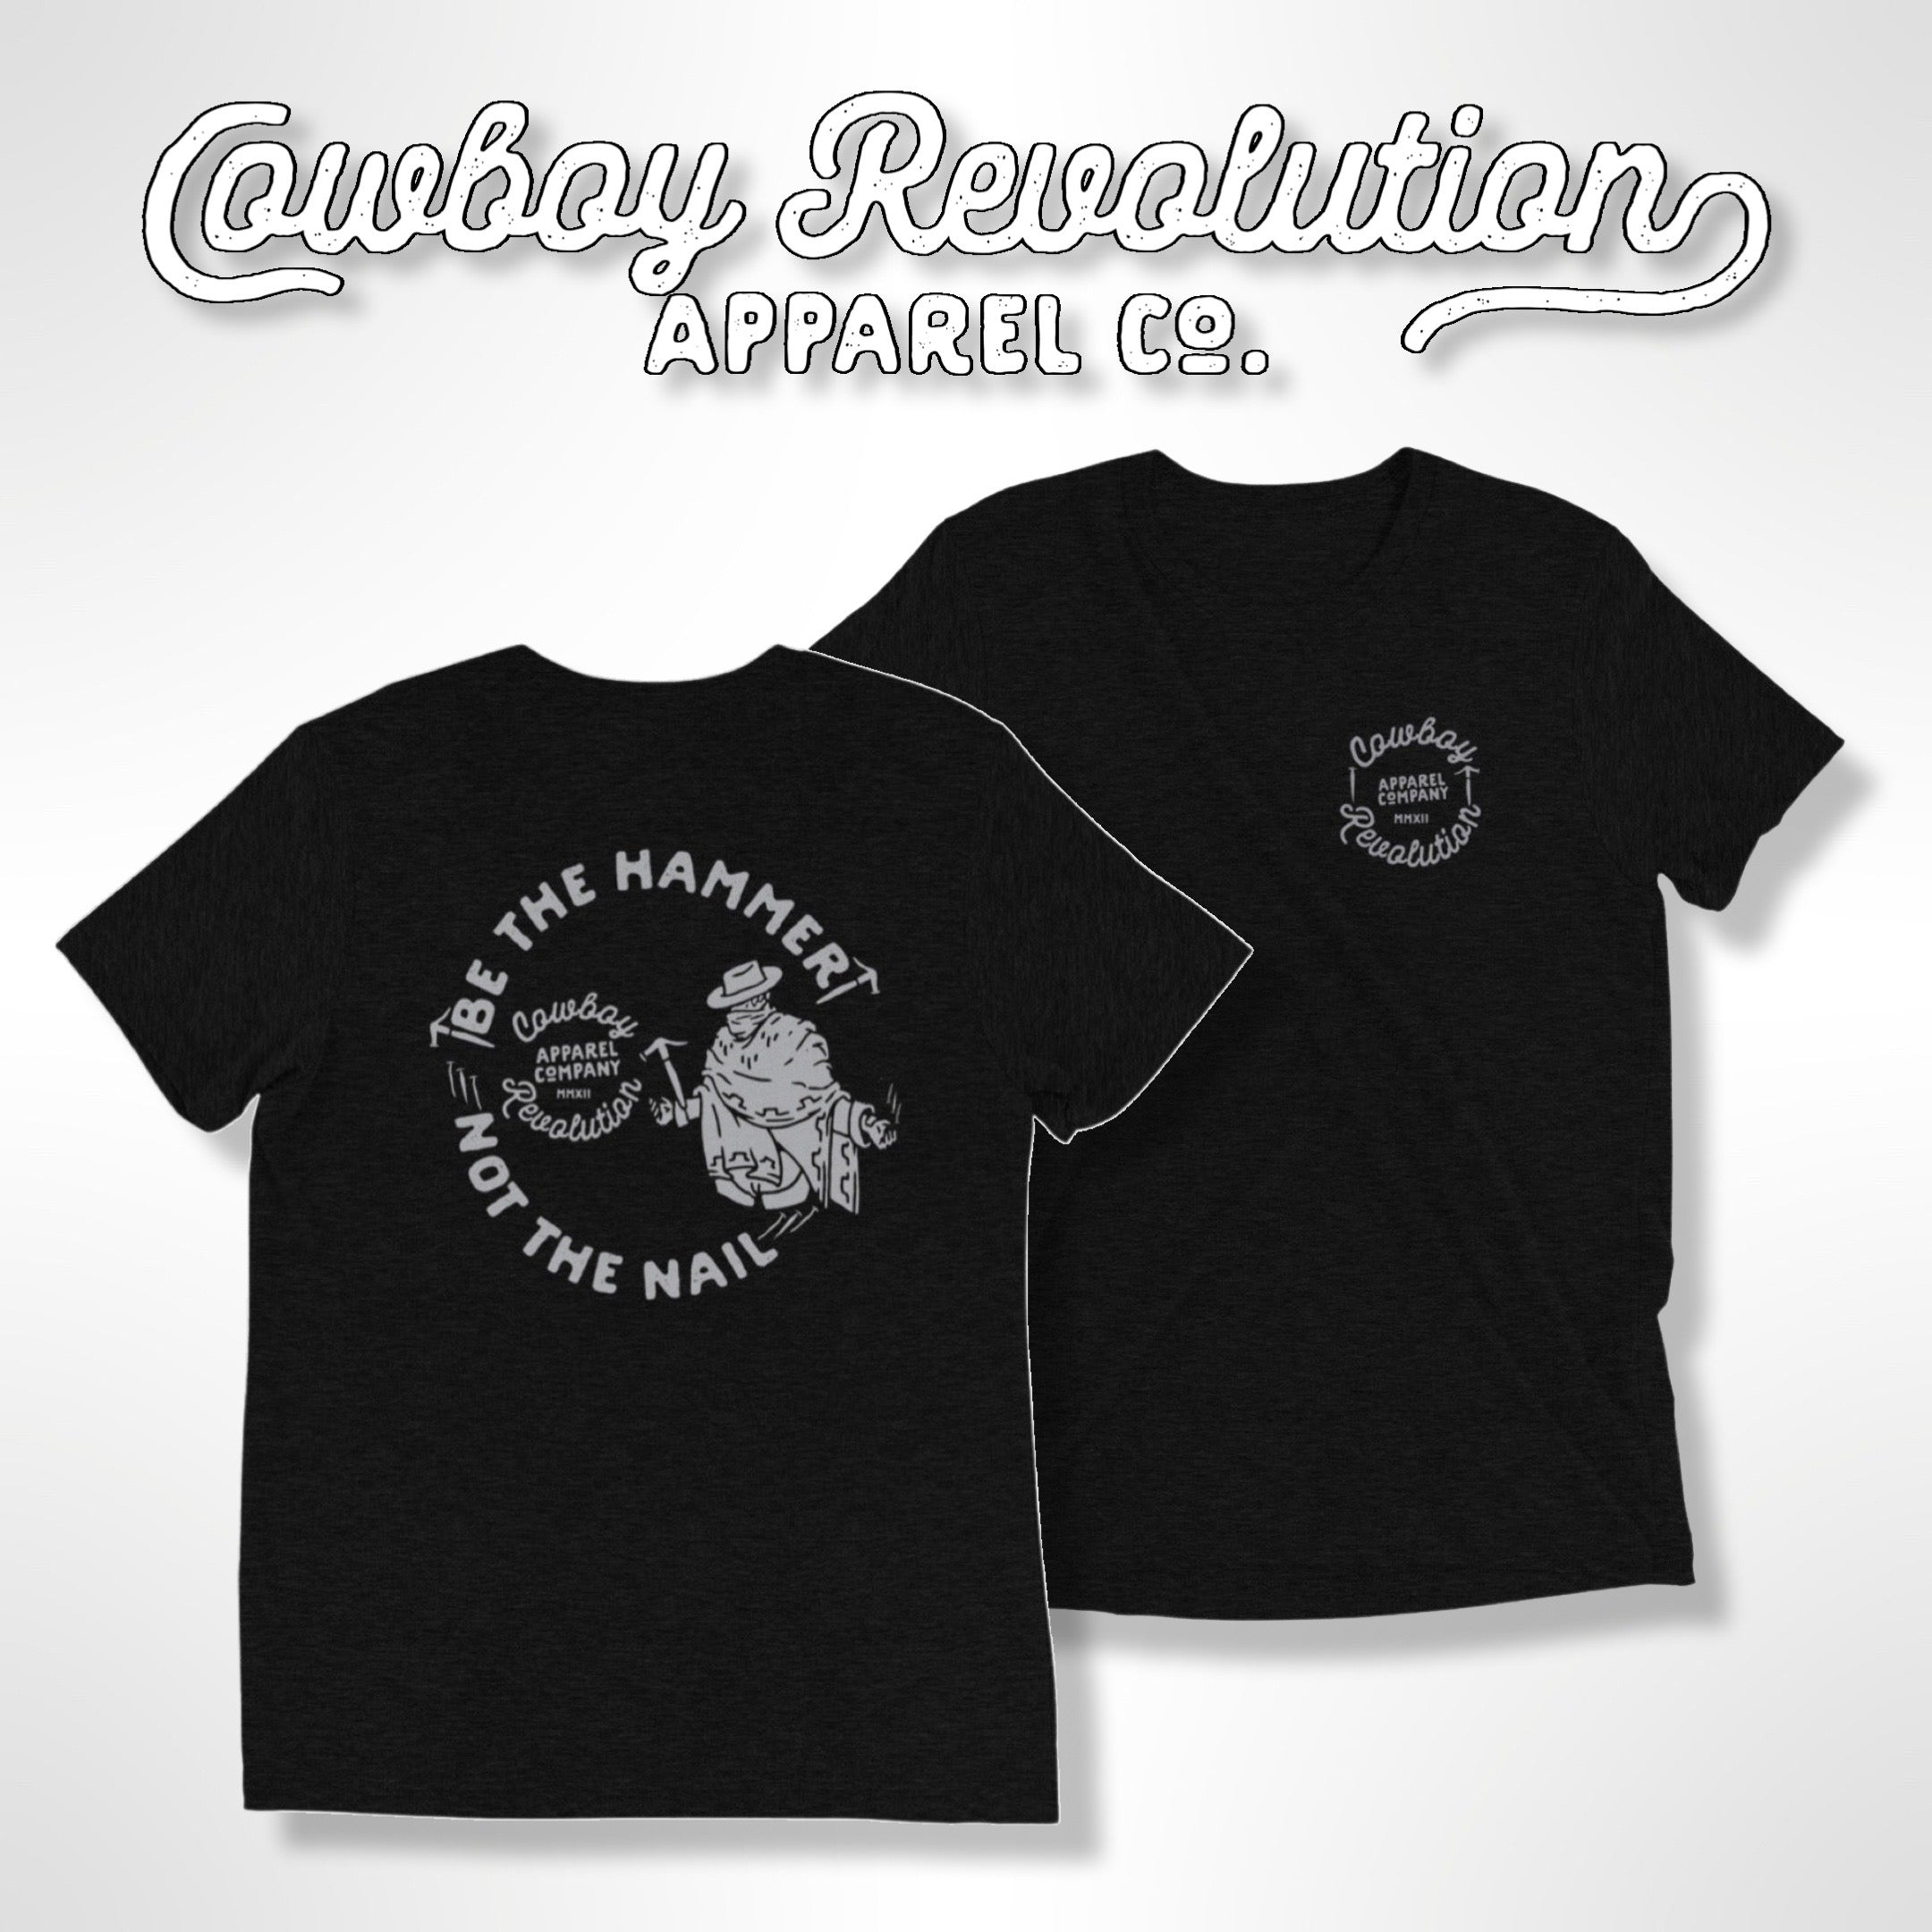 "Hammer and Nail" Cowboy Revolution S/S Tri-Blend Tee